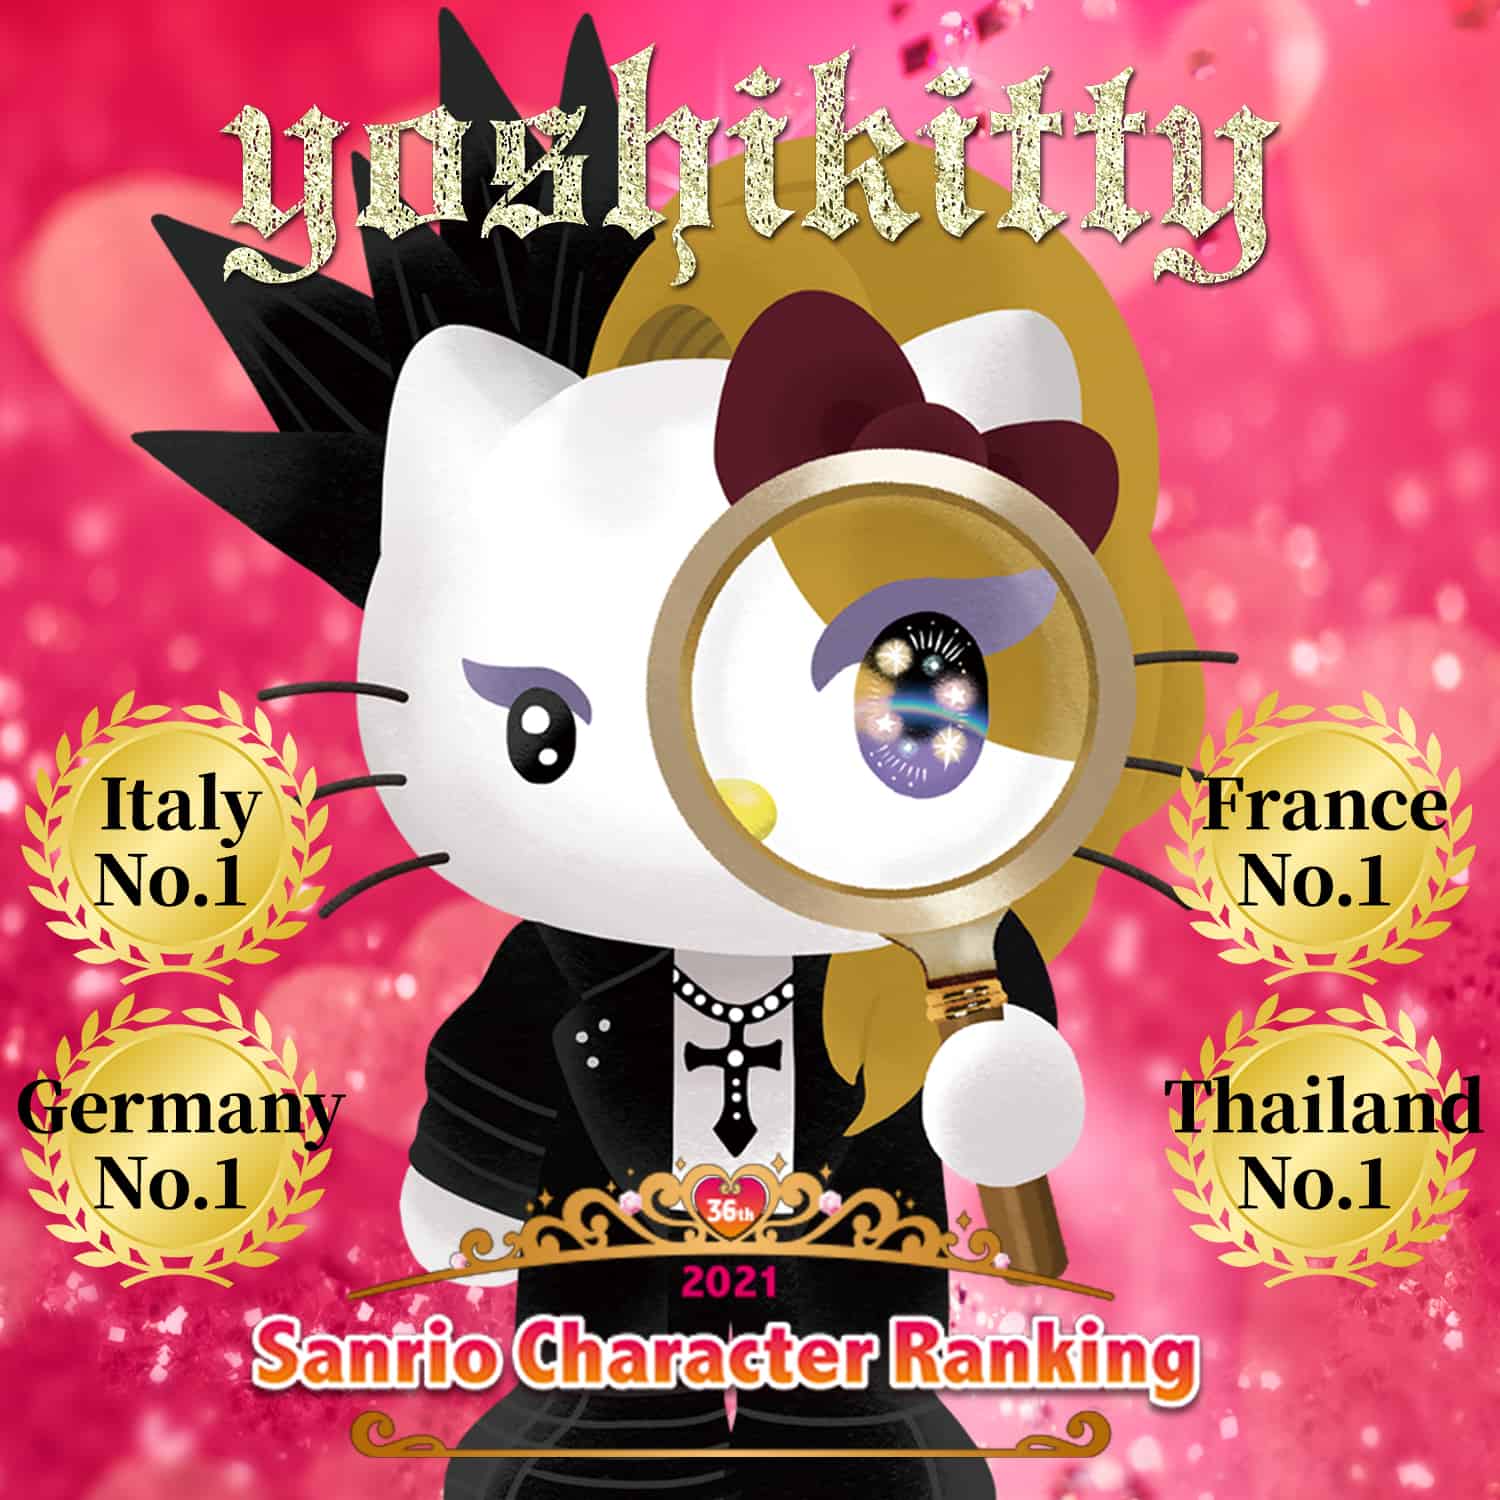 Yoshikitty Sweeps 2021 Sanrio Character Ranking, Claiming Number 1 Spot